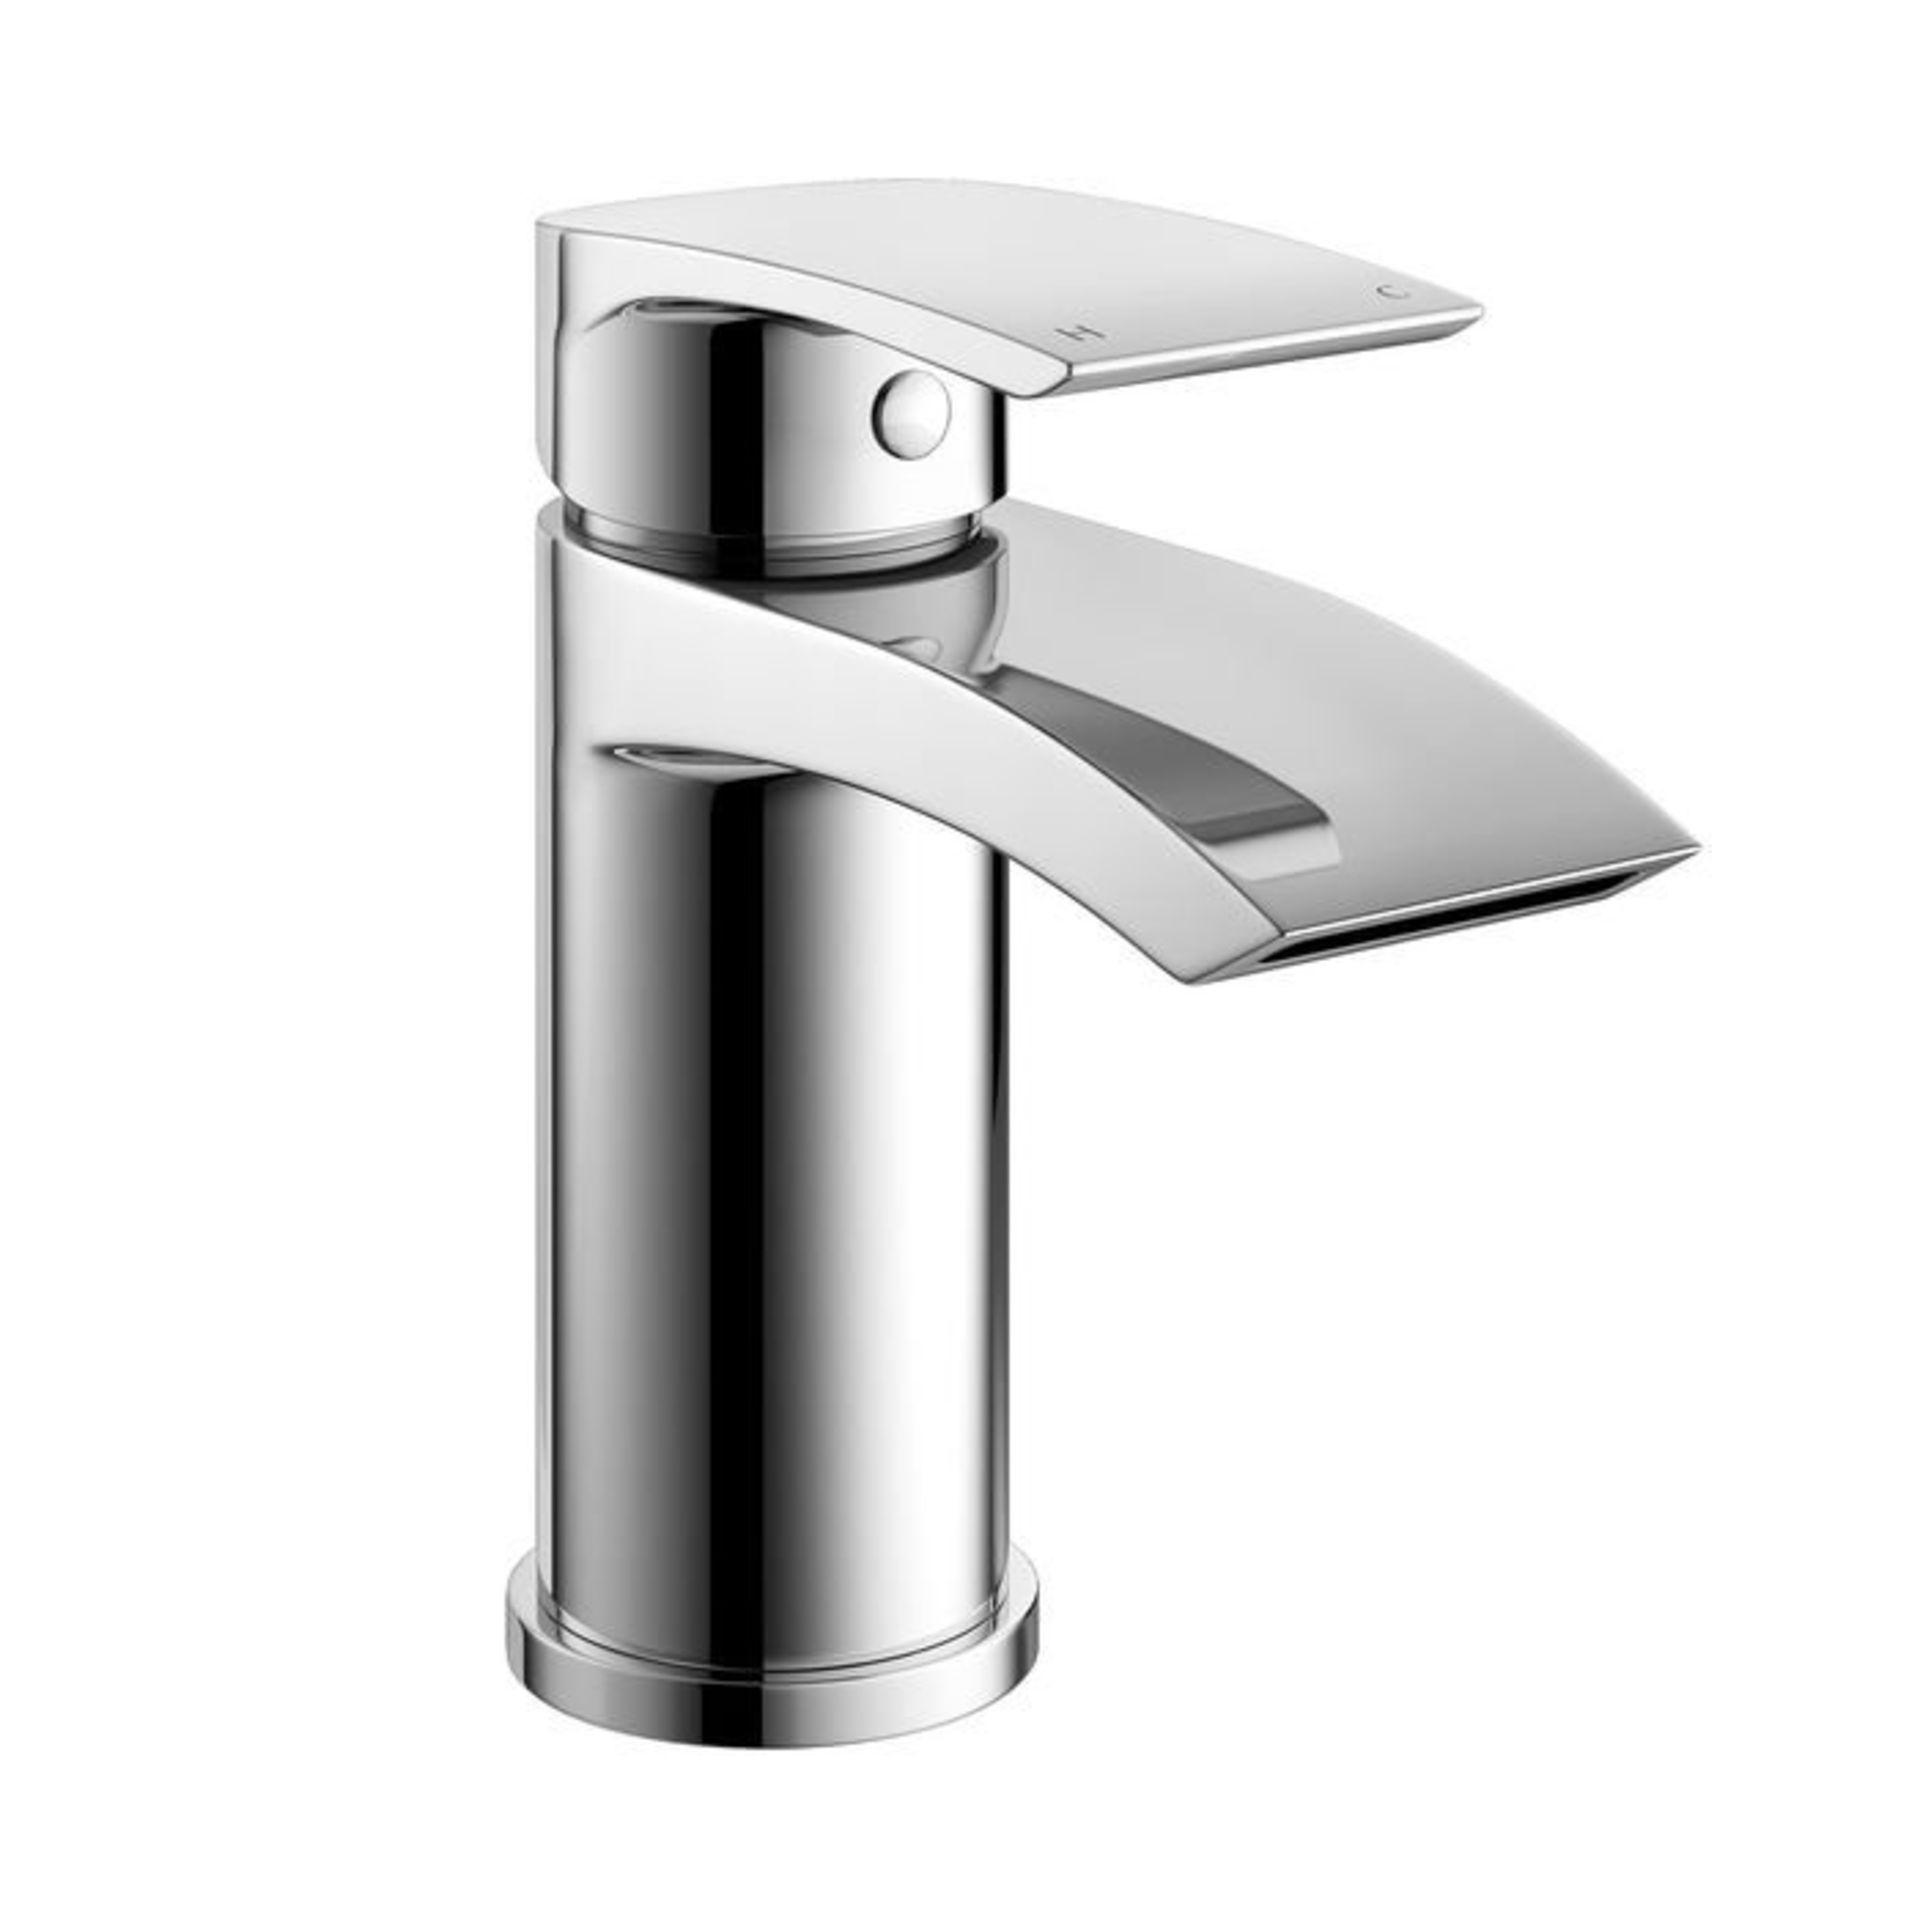 (G31) Avon Mono Basin Mixer Tap Crafted from chrome plated, corrosion free solid brass. Includes - Image 2 of 2